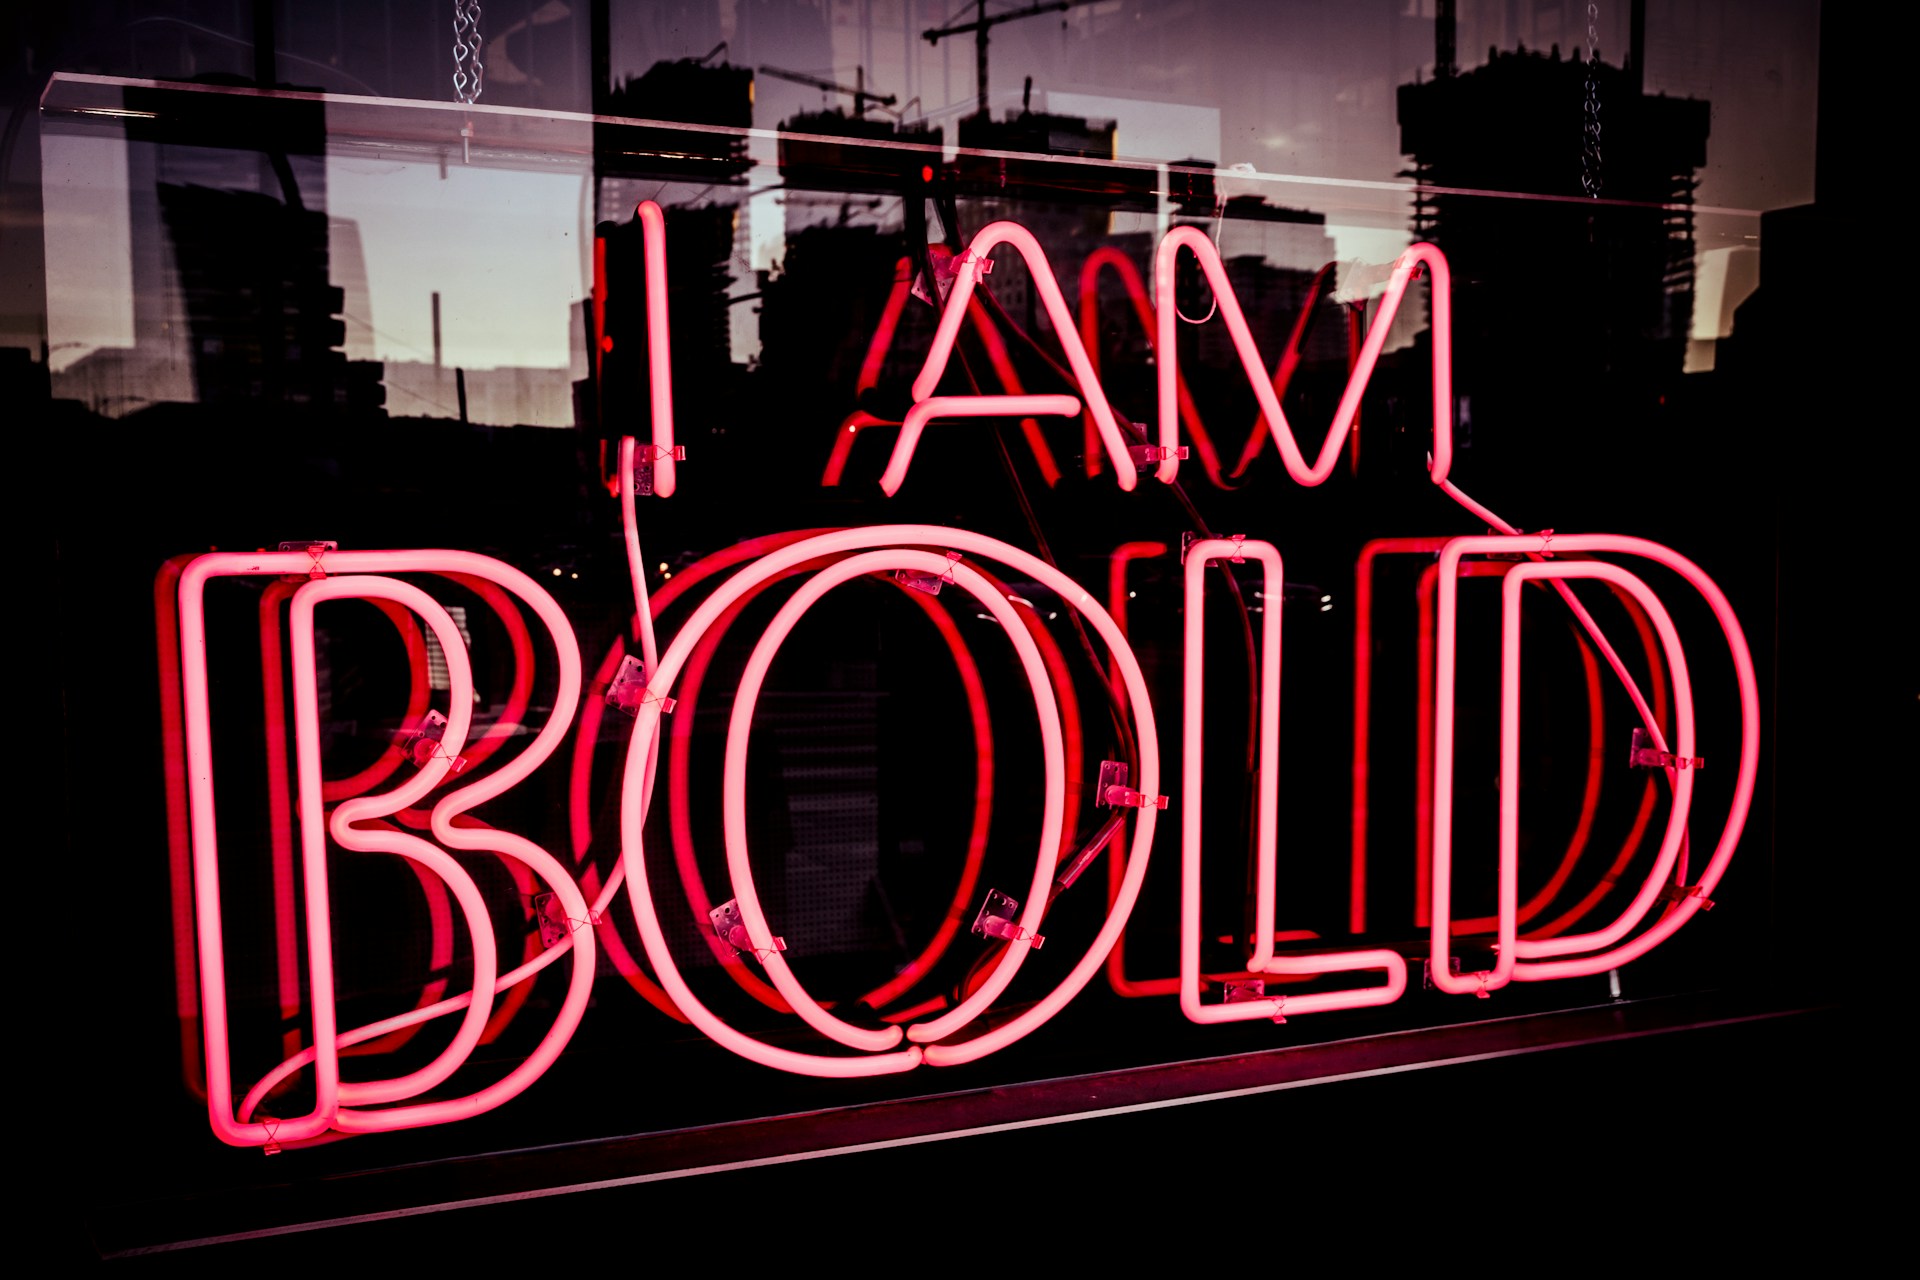 Featured Image for “The Power Is In The Boldness”